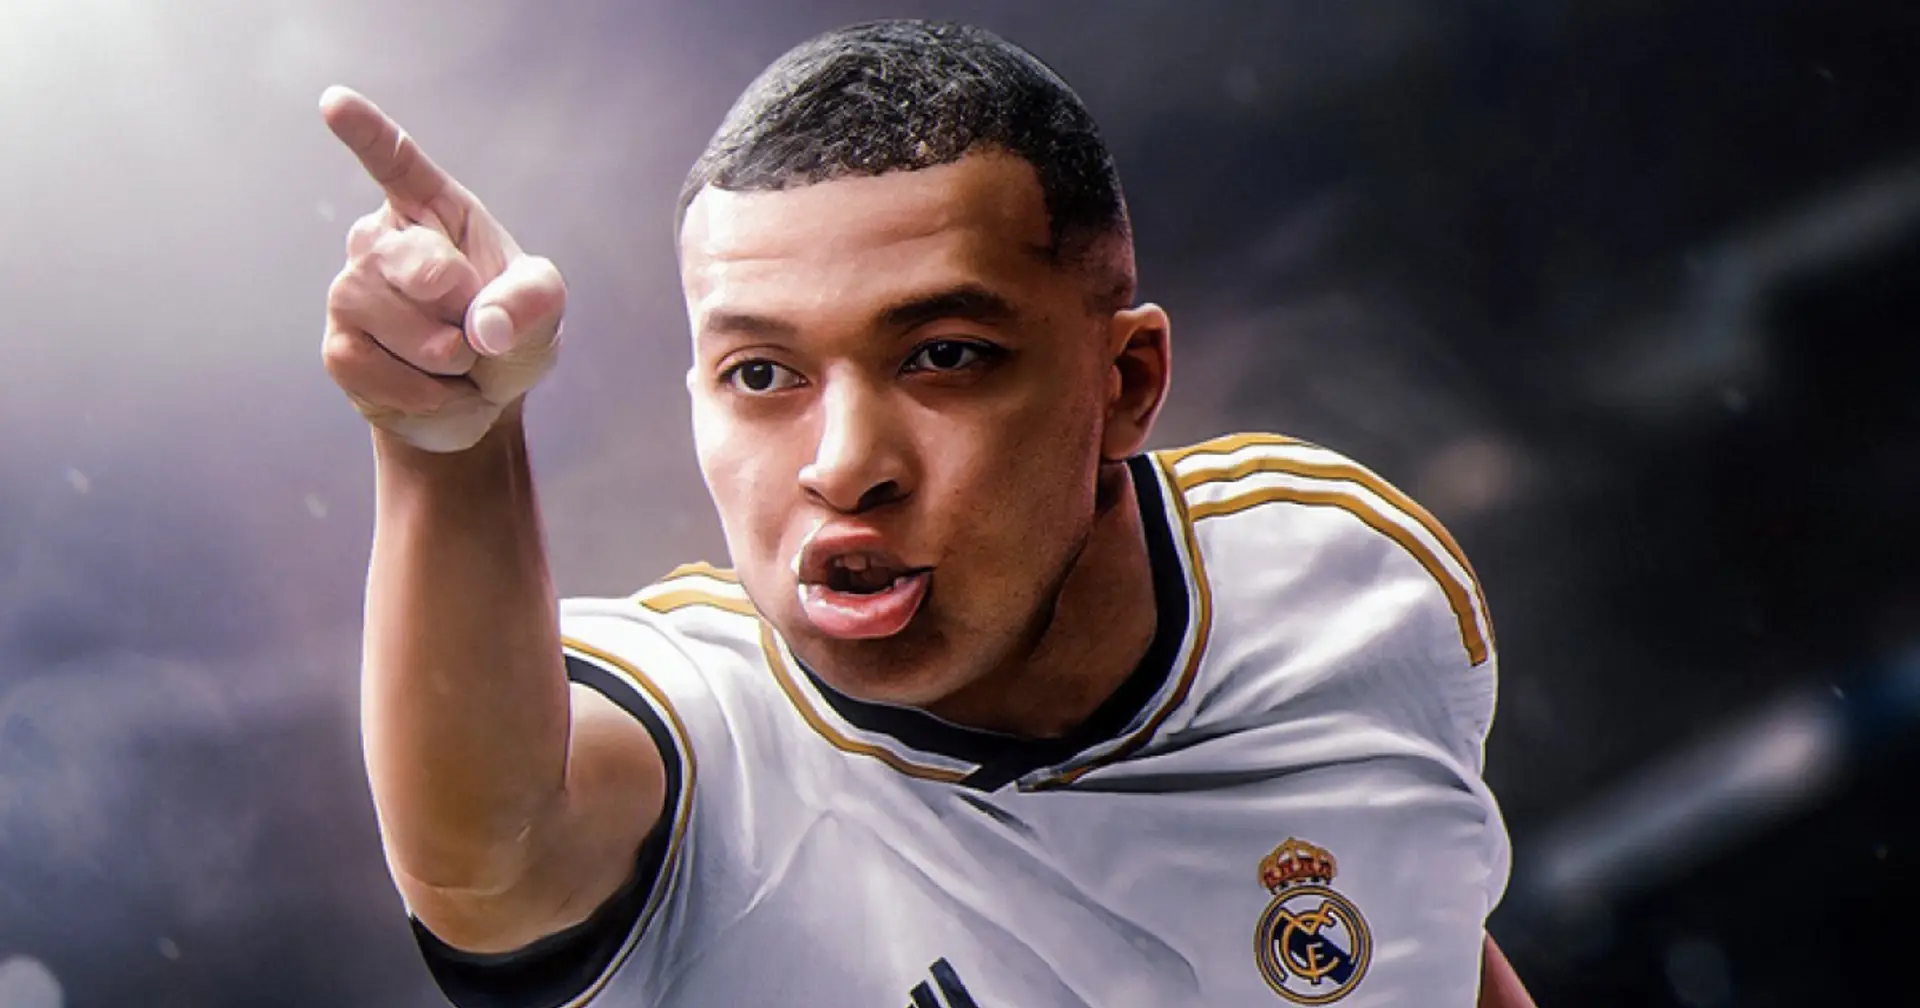 Kylian Mbappe will join Real Madrid – French media